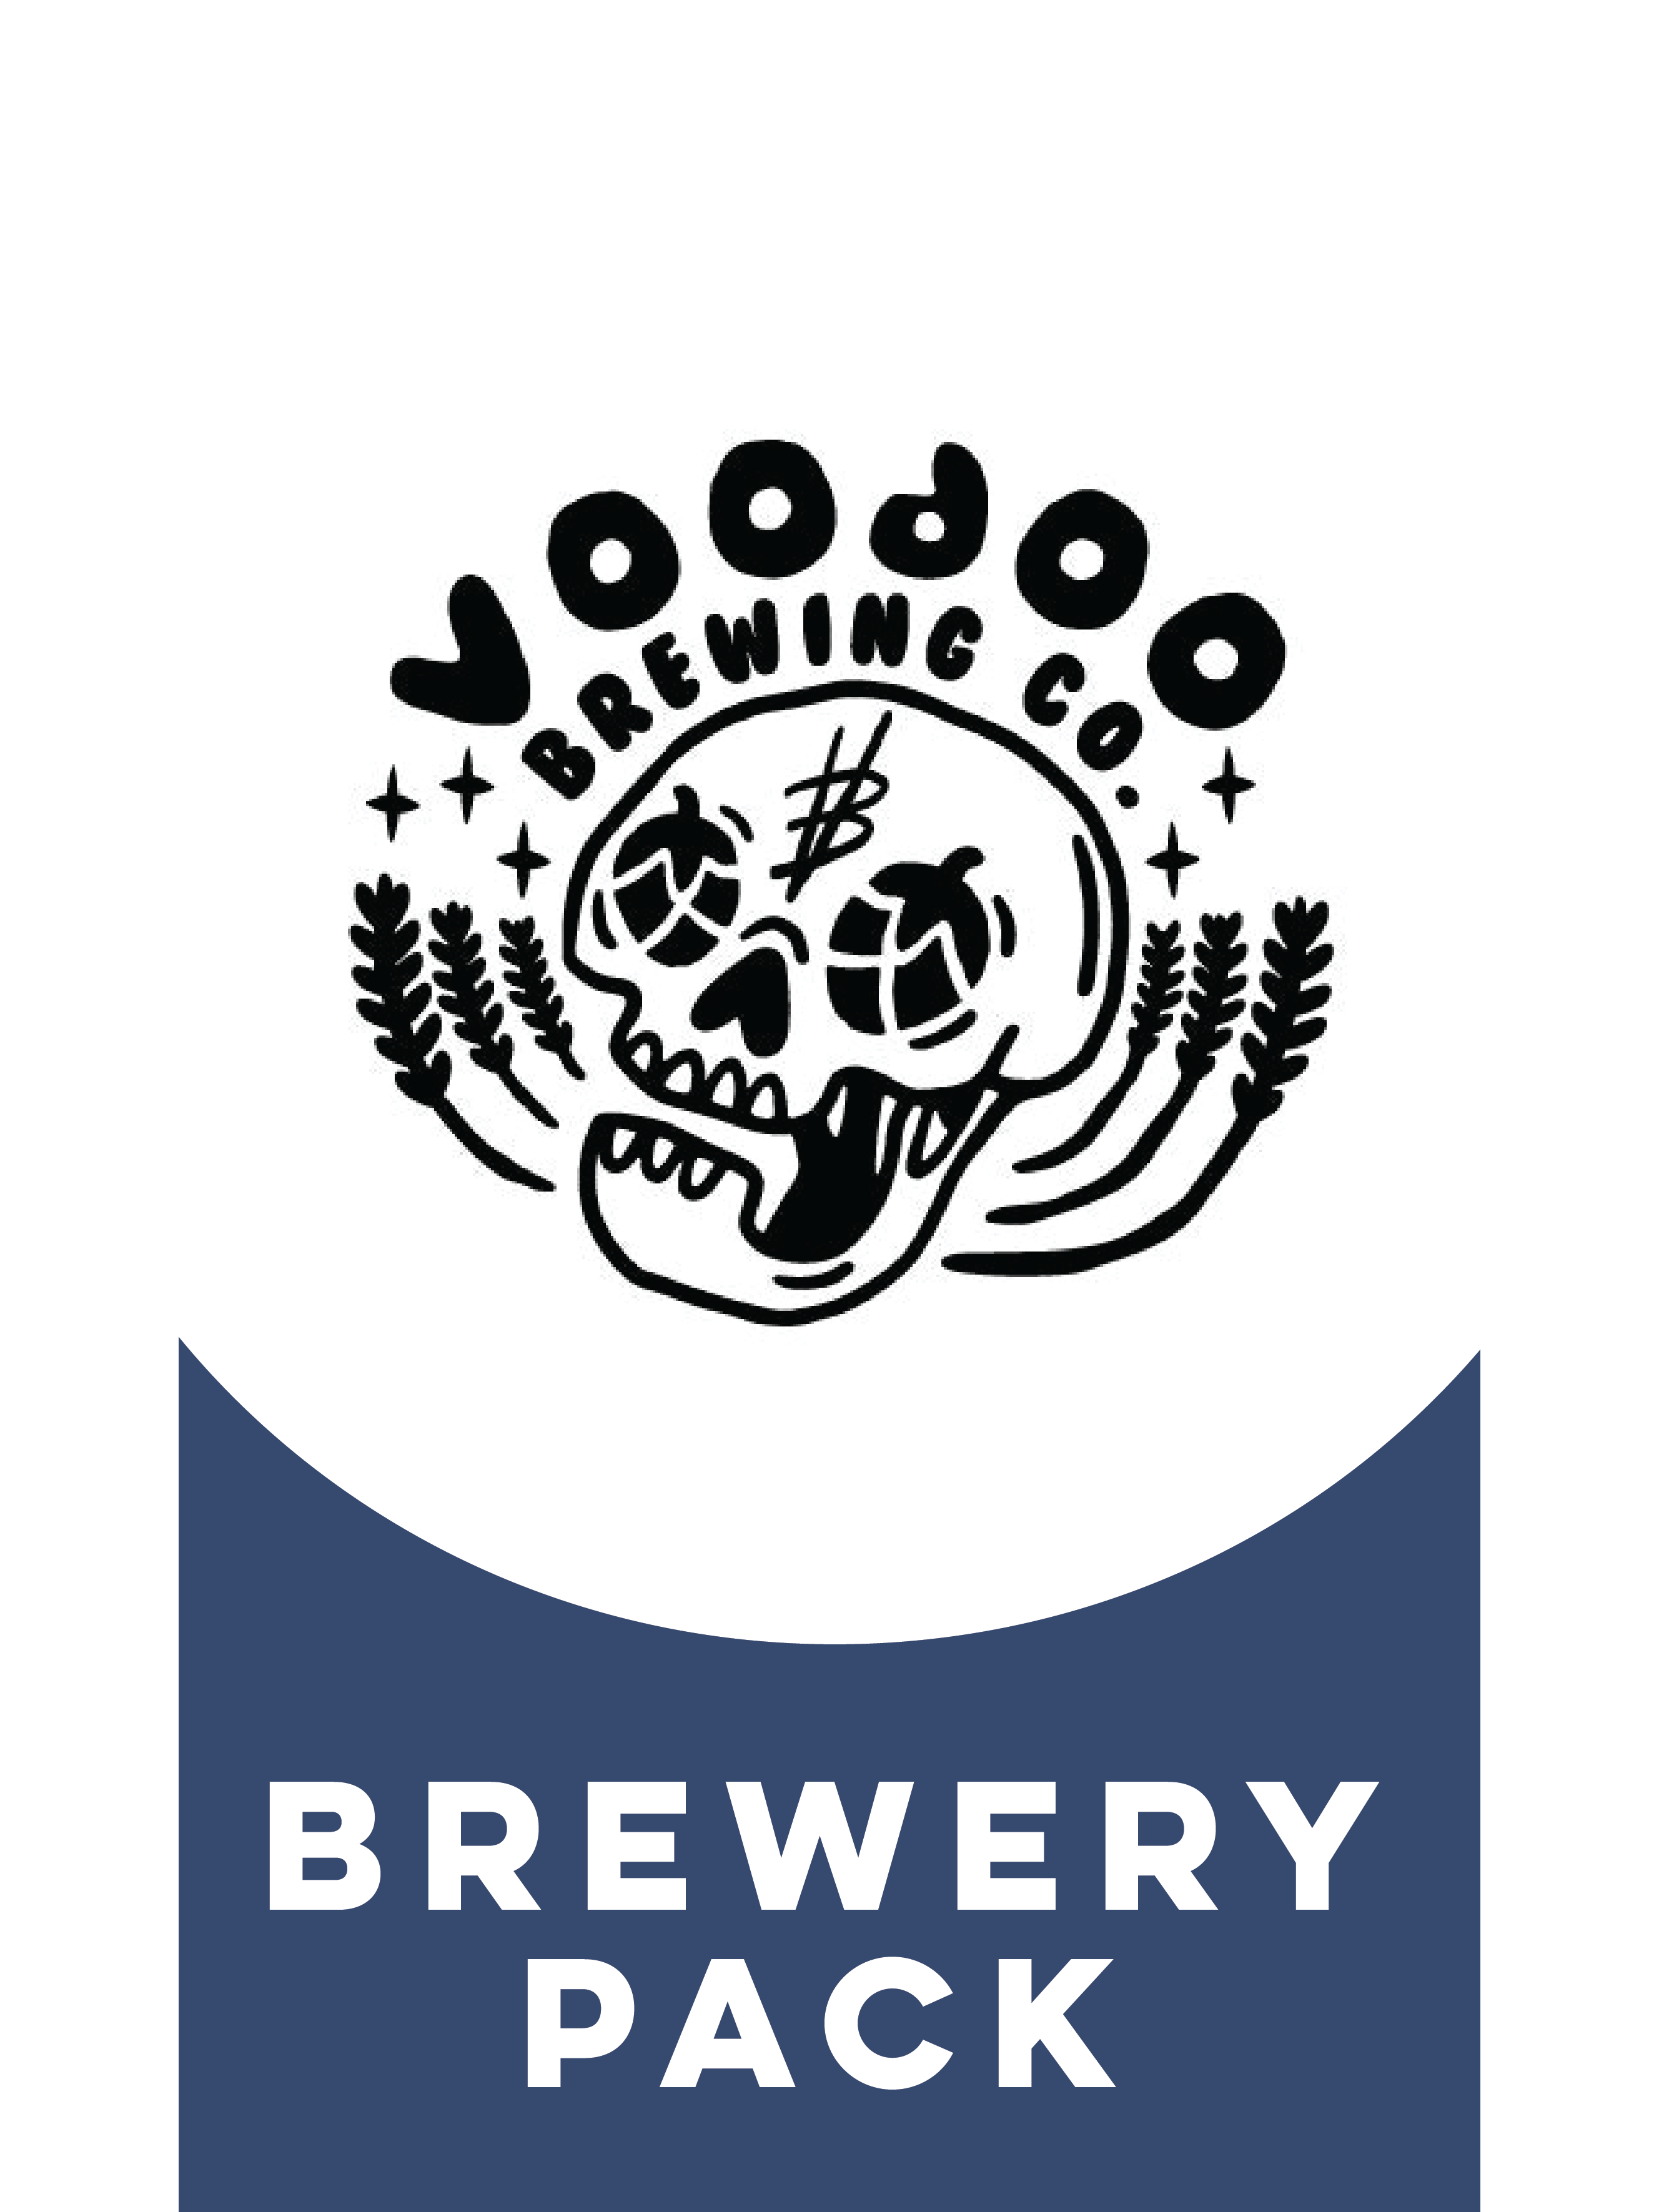 -Voodoo- Voodoo Brewery Pack-Packs & Cases- Only @ Beer Republic - The best online beer store for American & Canadian craft beer - Buy beer online from the USA and Canada - Bier online kopen - Amerikaans bier kopen - Craft beer store - Craft beer kopen - Amerikanisch bier kaufen - Bier online kaufen - Acheter biere online - IPA - Stout - Porter - New England IPA - Hazy IPA - Imperial Stout - Barrel Aged - Barrel Aged Imperial Stout - Brown - Dark beer - Blond - Blonde - Pilsner - Lager - Wheat - Weizen - Am